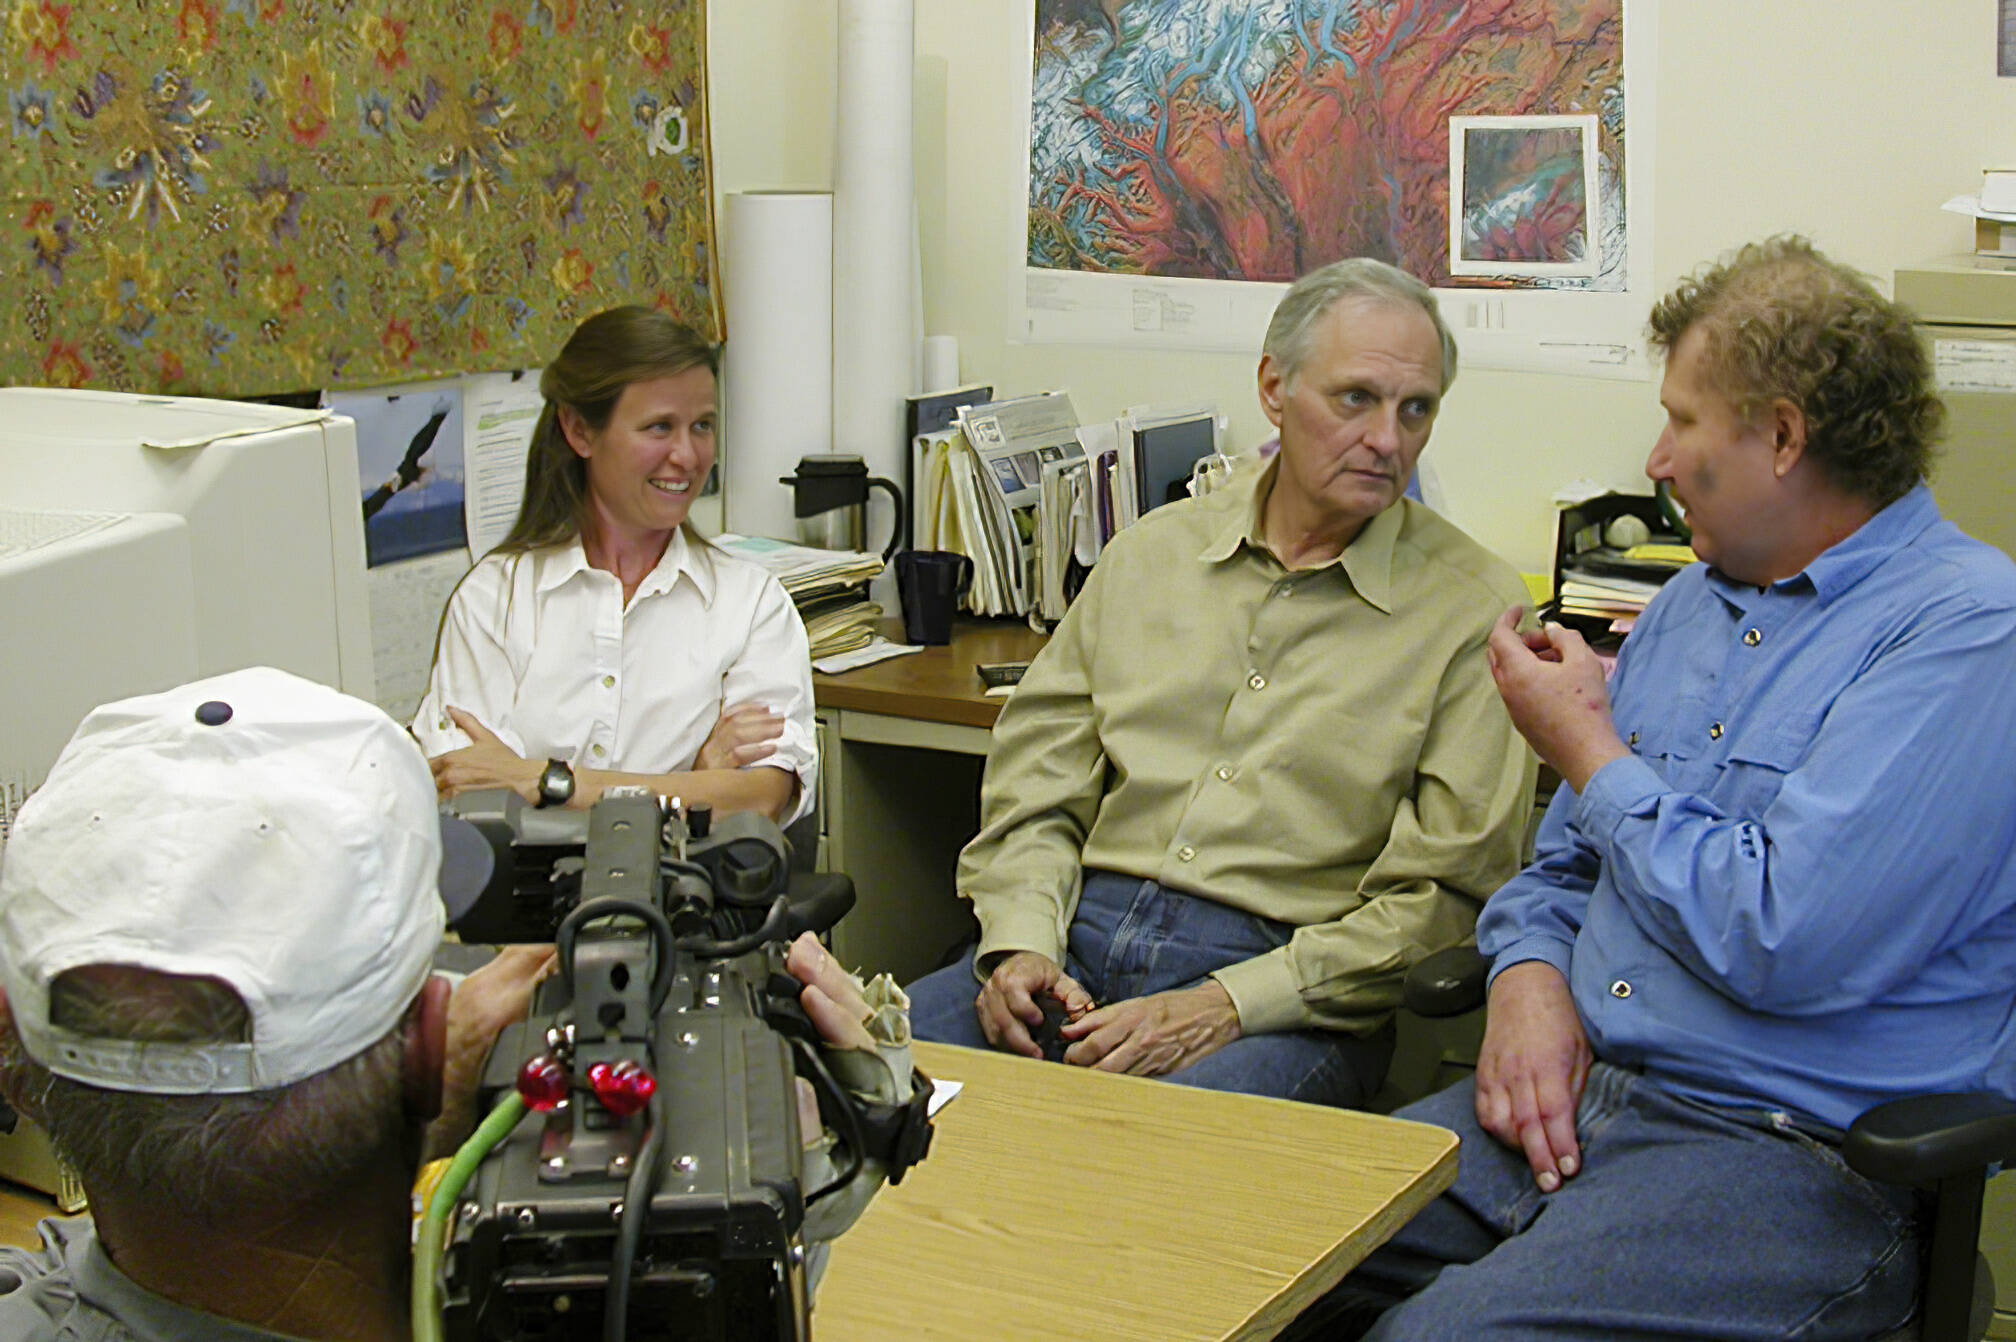 Alan Alda, center, was host of PBS’s “Scientific American Frontiers” when he visited Alaska in 2004. To his right is By Valentine, who worked in the glaciers lab at the Geophysical Institute with glaciologist Keith Echelmeyer (on Alda’s left). Echelmeyer died of brain cancer six years after Alda’s visit. (Courtesy Photo / Ned Rozell, enhanced 18 years later by JR Ancheta)